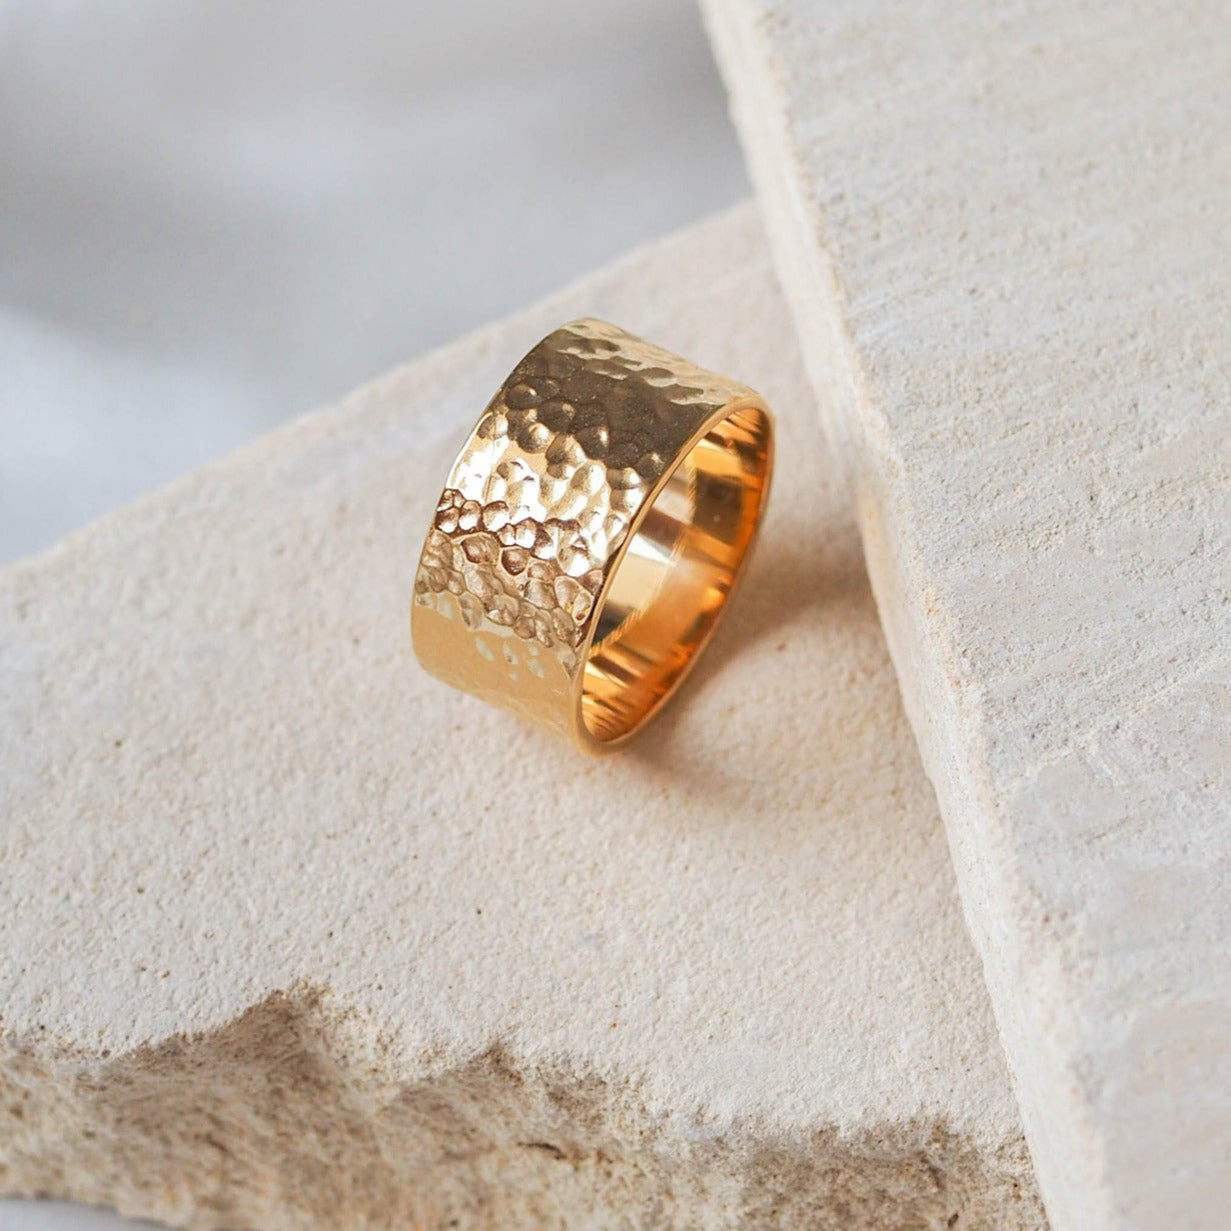 MOMA Hammered Ring 10mm - Gold